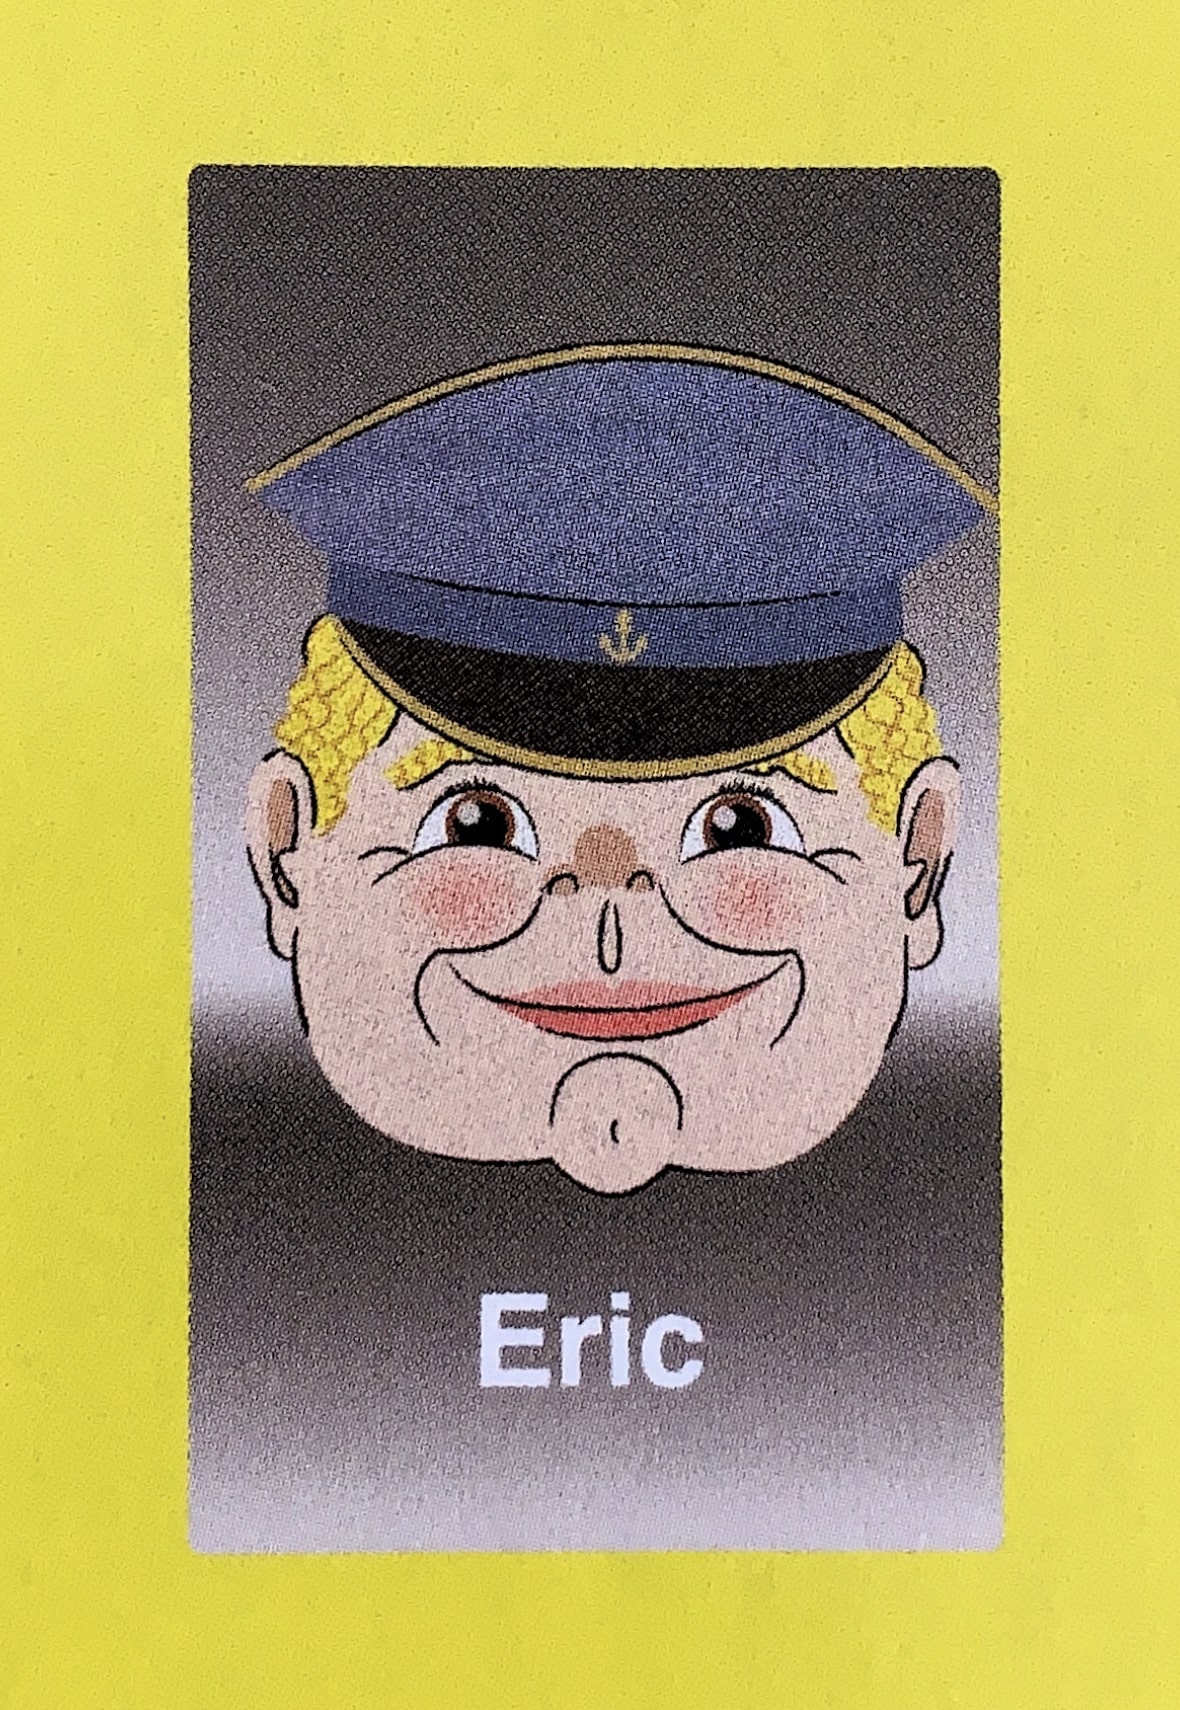  - Eric grew up in coastal Maine, manning his father’s nets on their fishing boat as early as middle school. When the Guess Who?® executives heard about his upbringing, they wanted to incorporate that into his card, and asked him to wear a sailor’s hat for the photo. When Eric returned home for the first time after the game’s release, his father refused to make eye contact… he was ashamed. Ashamed that his only son would publicly humiliate the family by donning the cap of a simple SAILOR when their bloodline had been FISHERMEN for centuries. His father was very concerned with this distinction for some reason. He never forgave Eric for the Guess Who?® photo, and died a bitter old man. In fact, his epitaph reads, “Here lies a fisherman, who never sailed a day in his life.”  